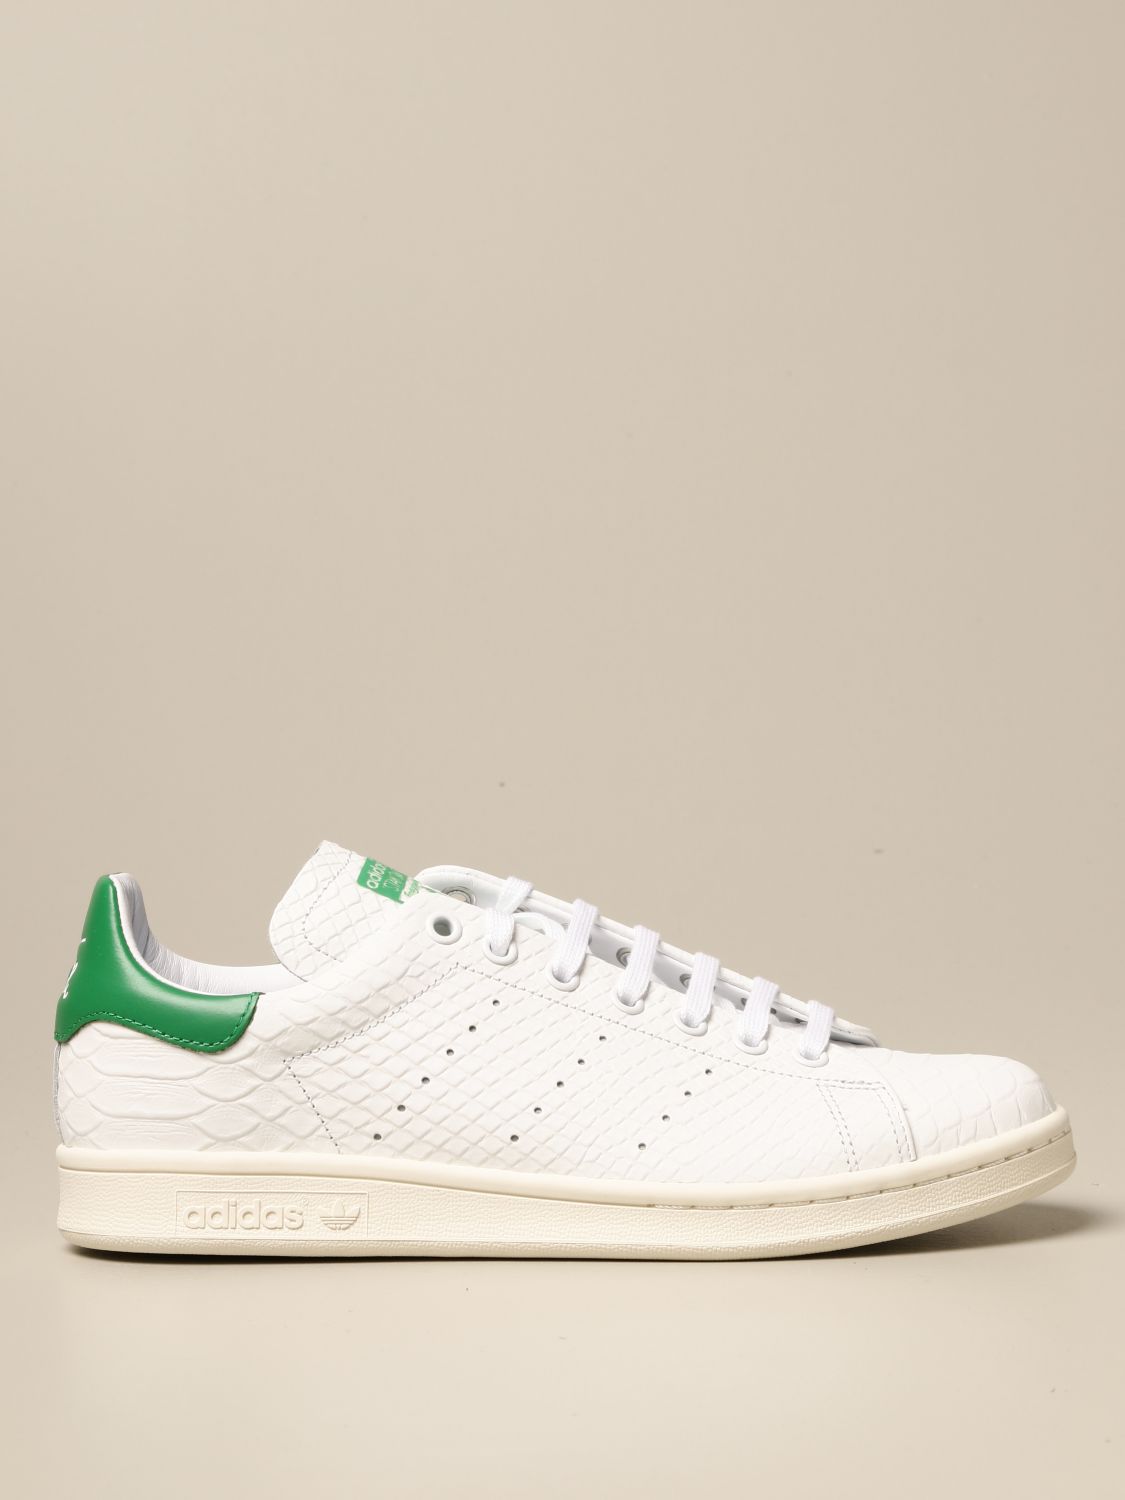 chaussures adidas homme blanche